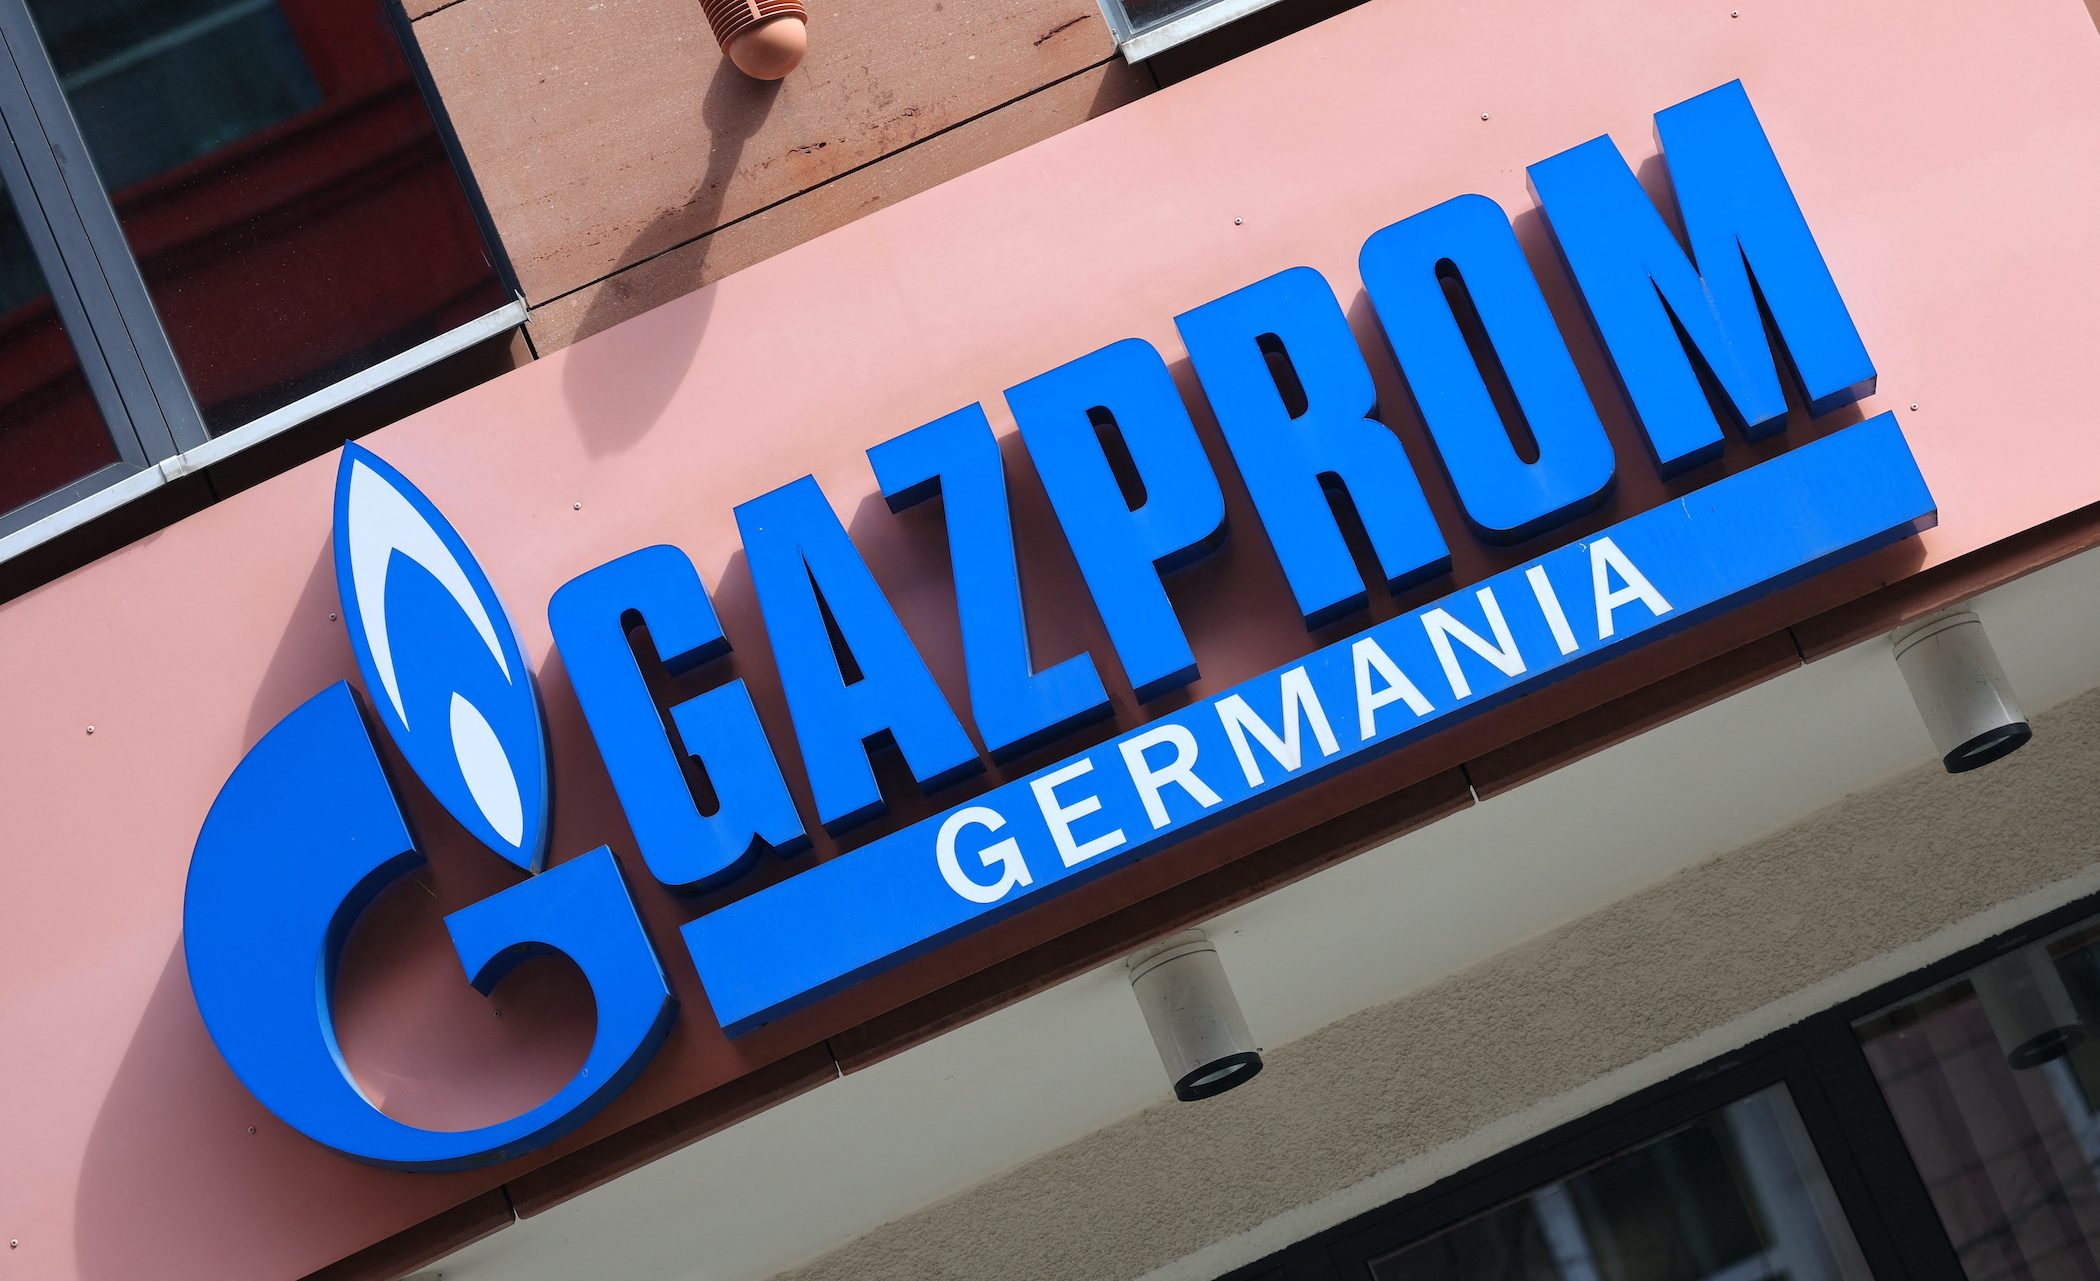 Russia’s Gazprom exits German business amid row over pricing